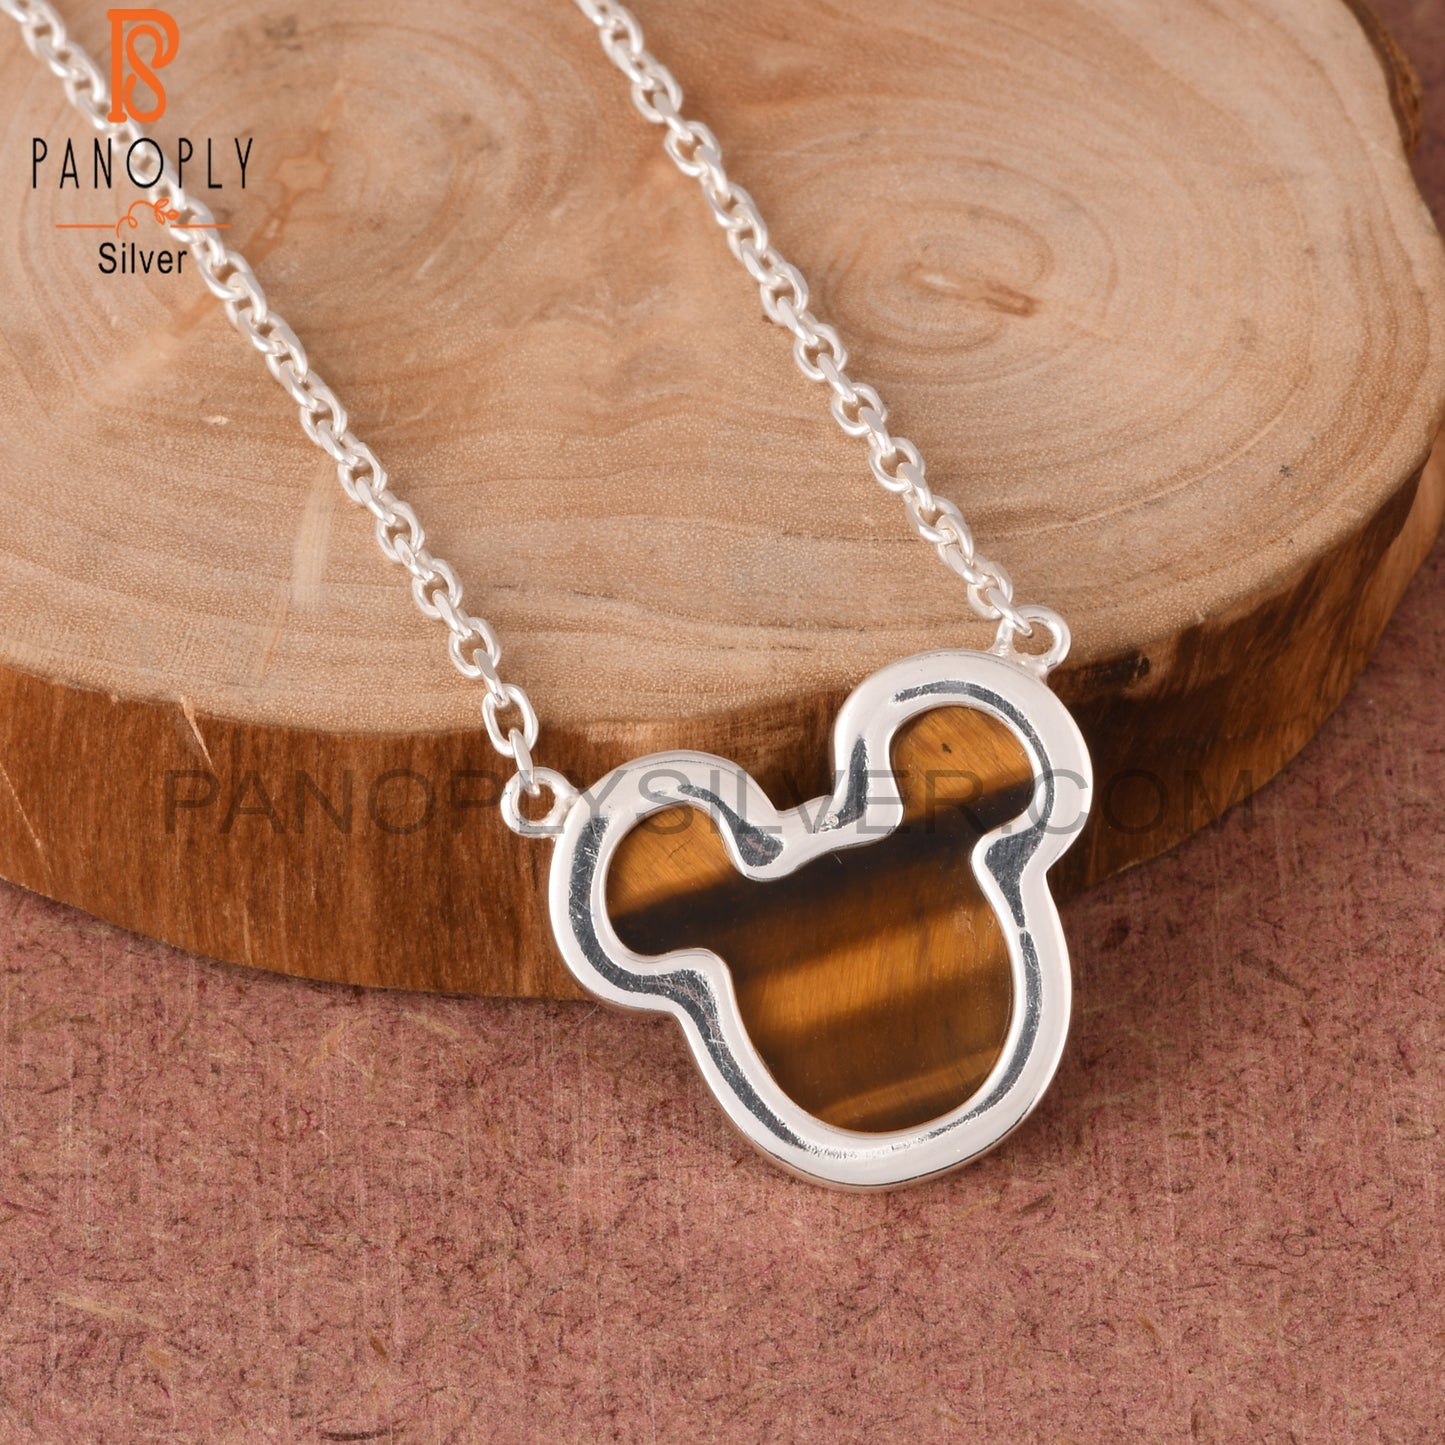 Tiger Eye Yellow Mickey Mouse 925 Sterling Silver Pendant